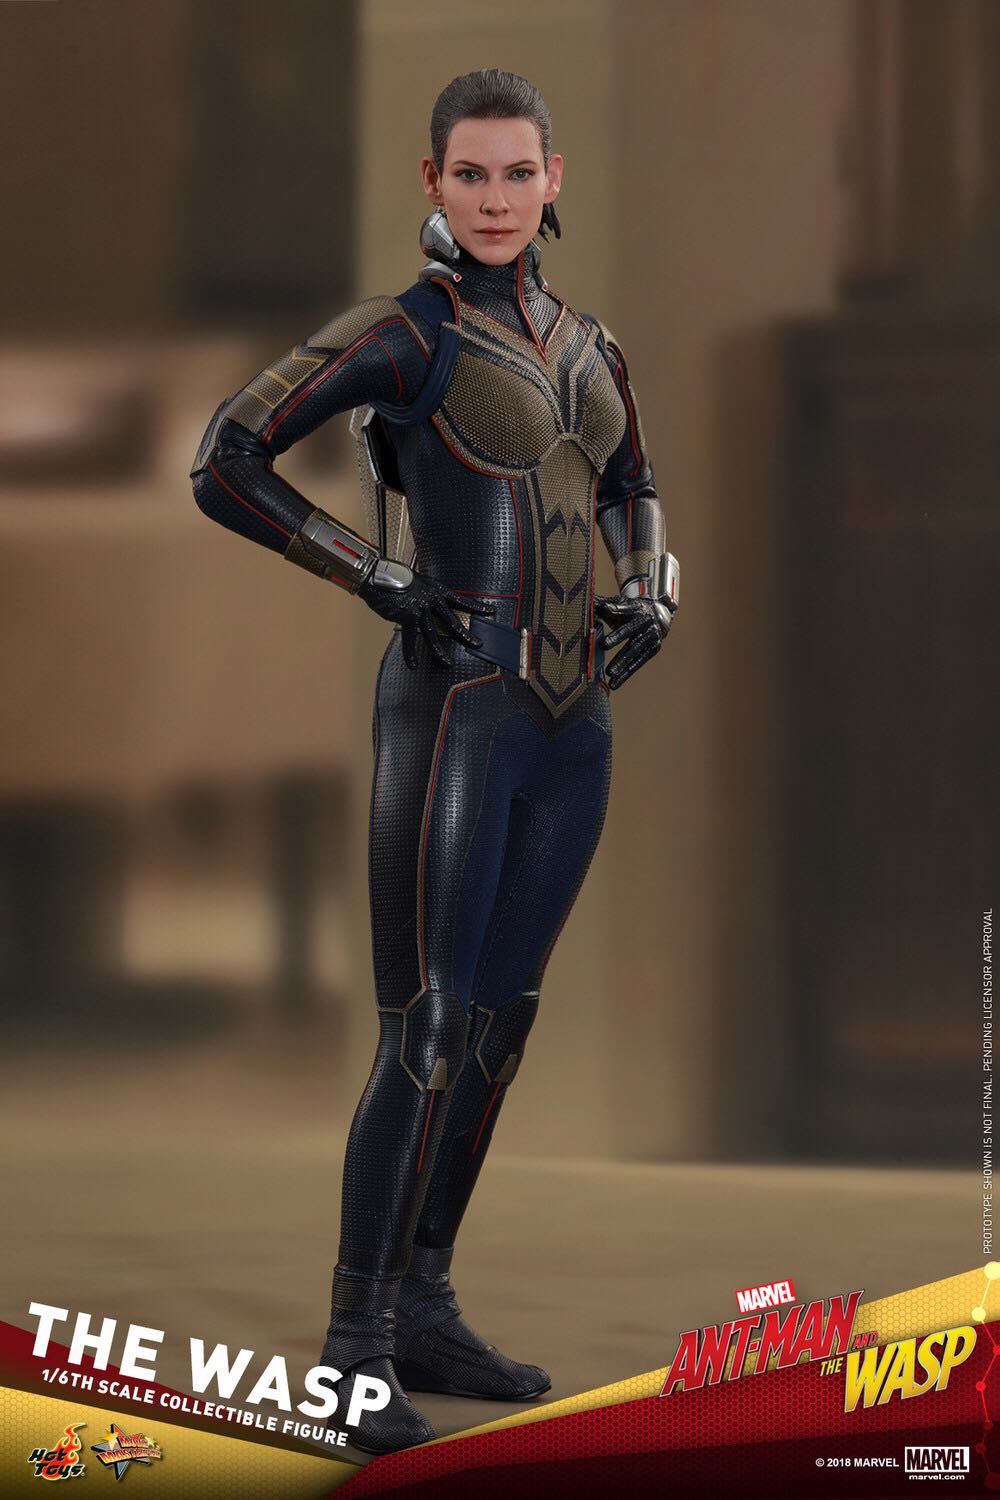 The Wasp - Hot Toys (Ant-Man And The Wasp) action figure collectible - Main Image 2